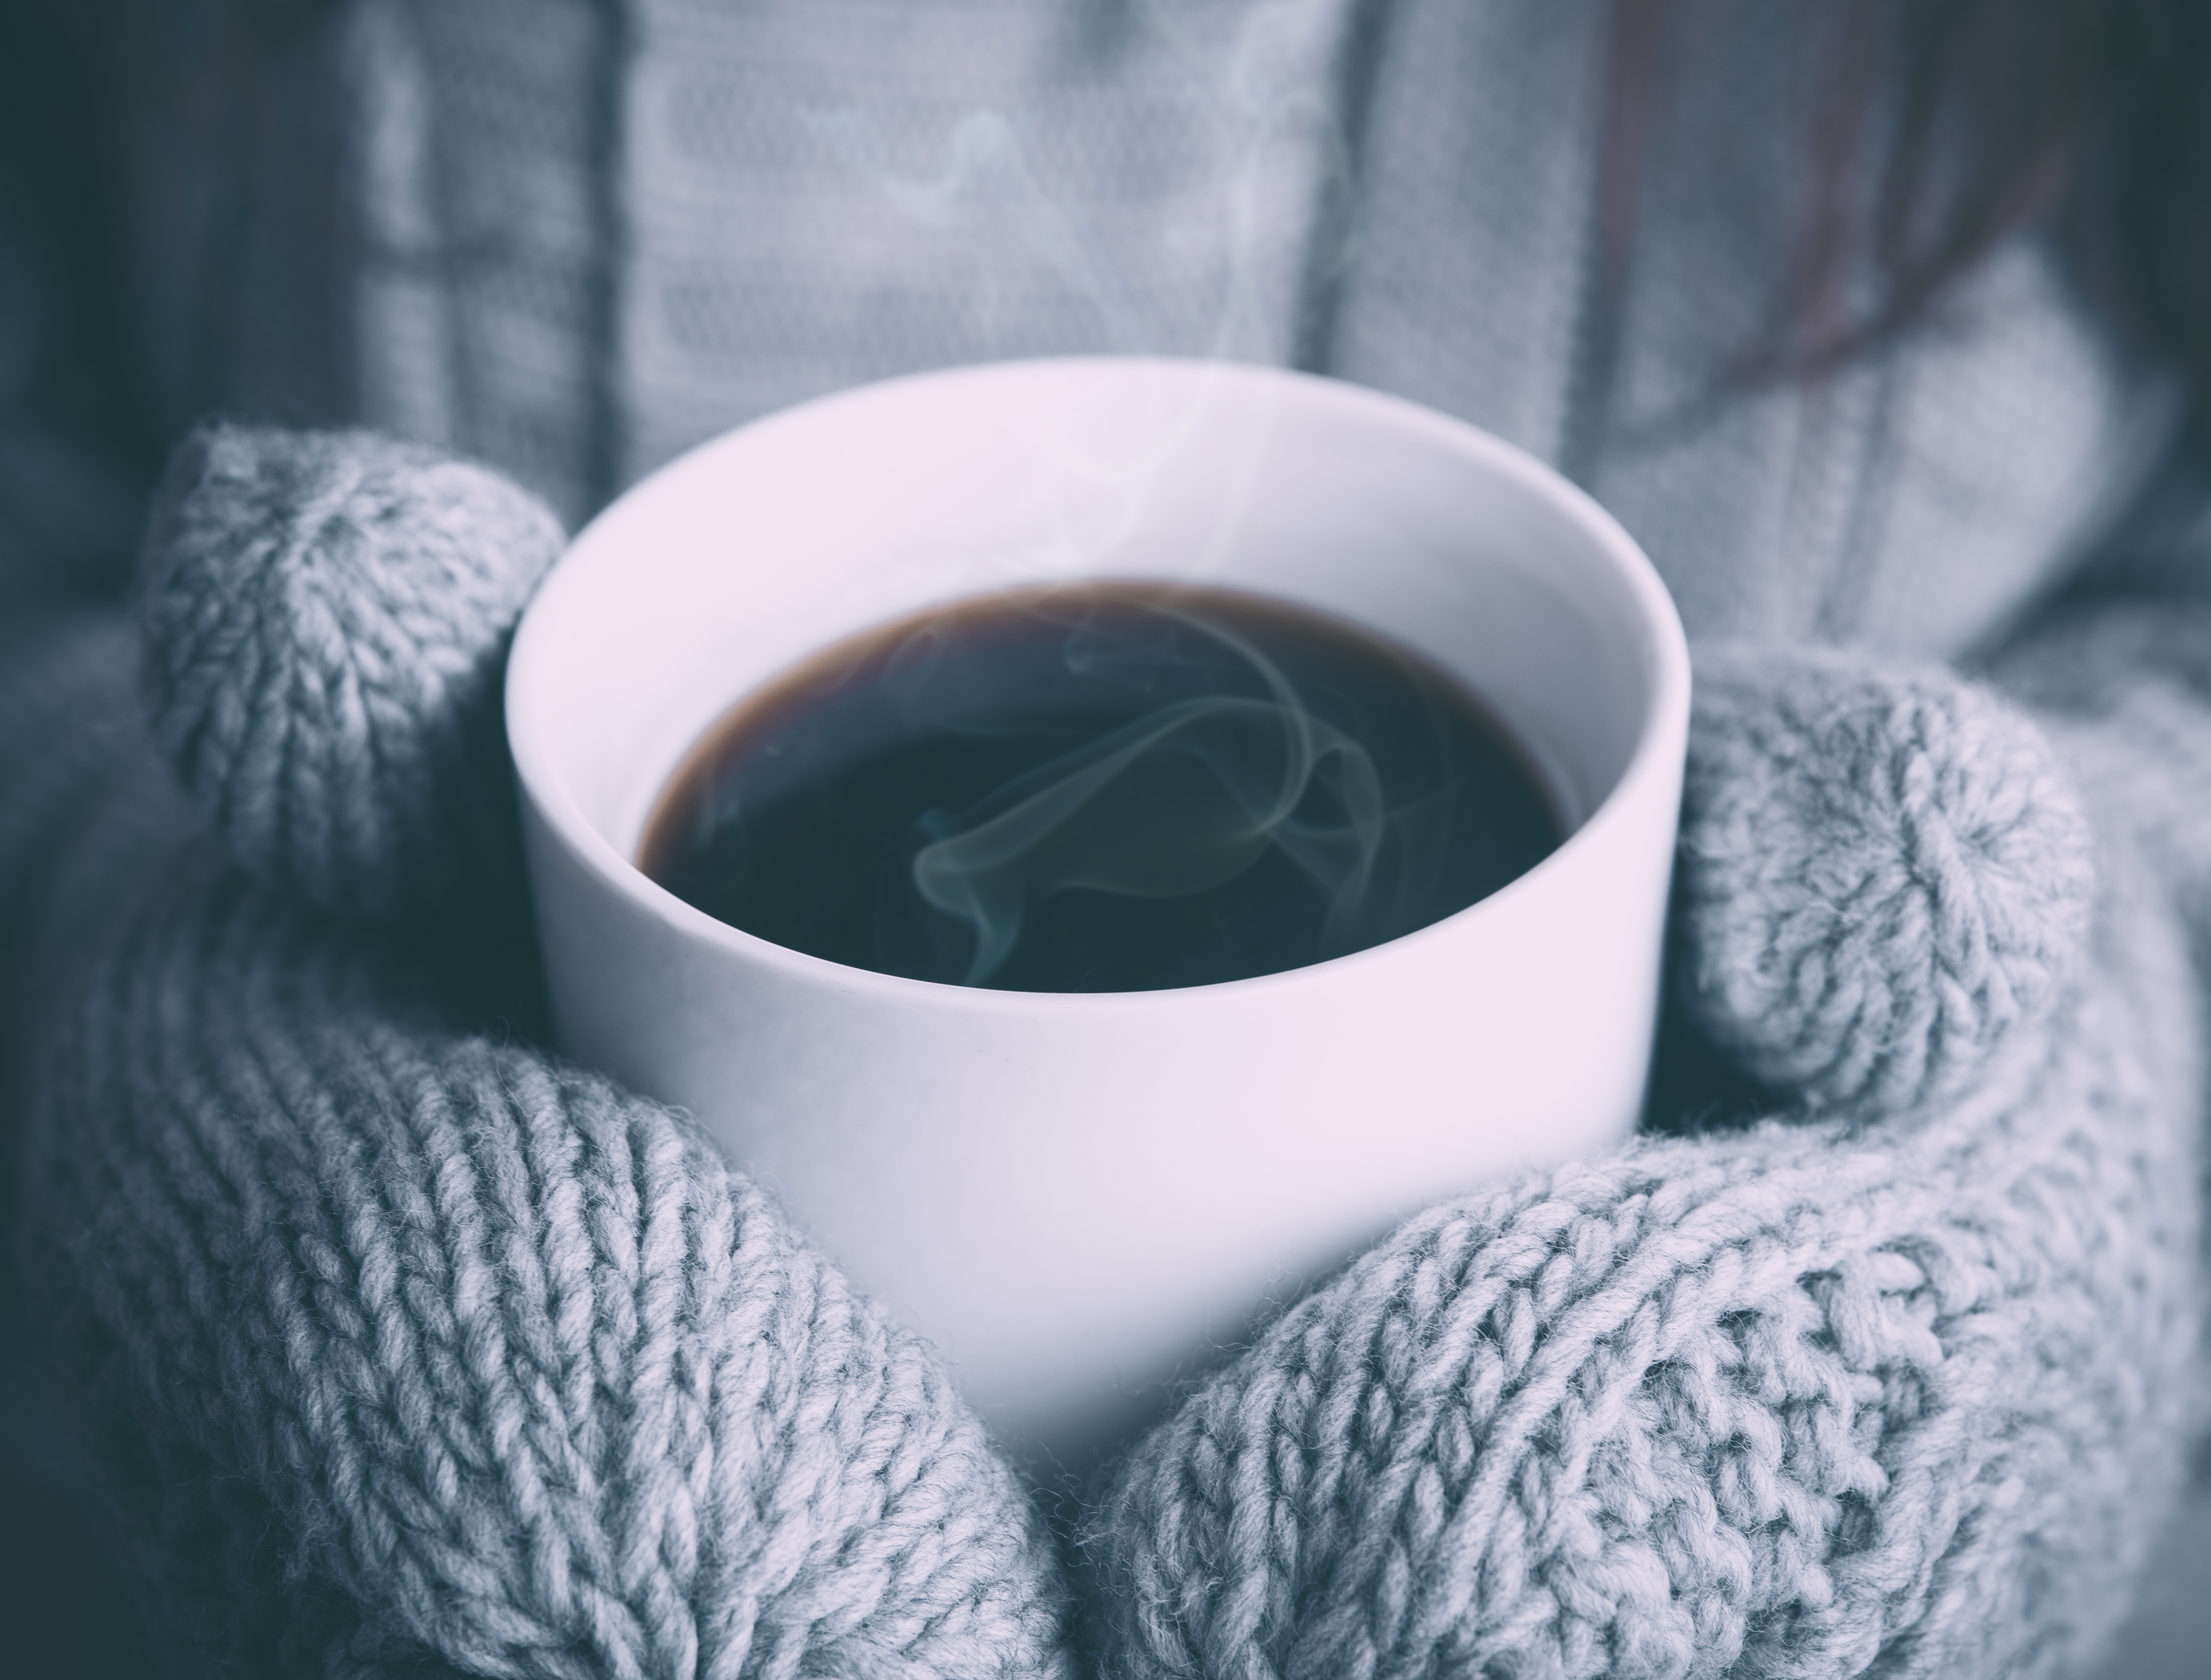 Mitten hands holding hot chocolate or coffee - free winter stock photo